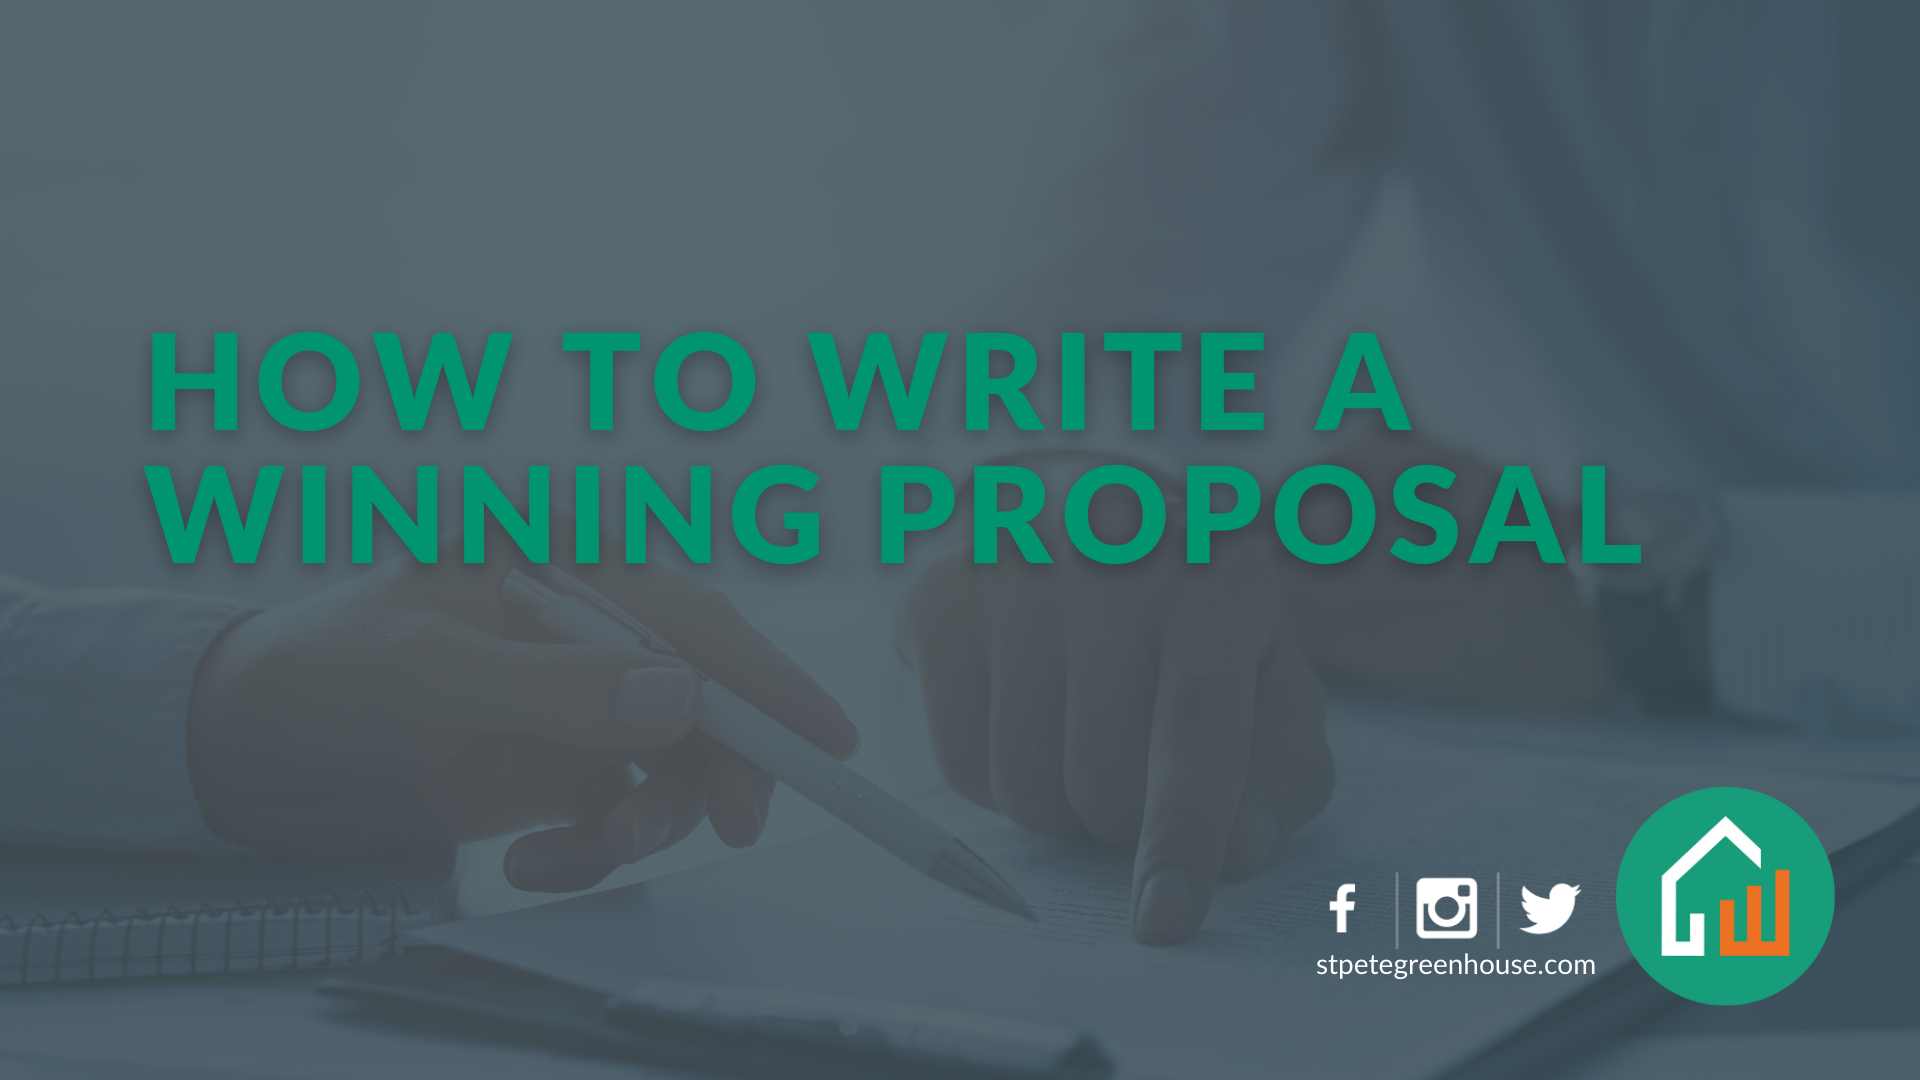 How to Write a Winning Proposal-image